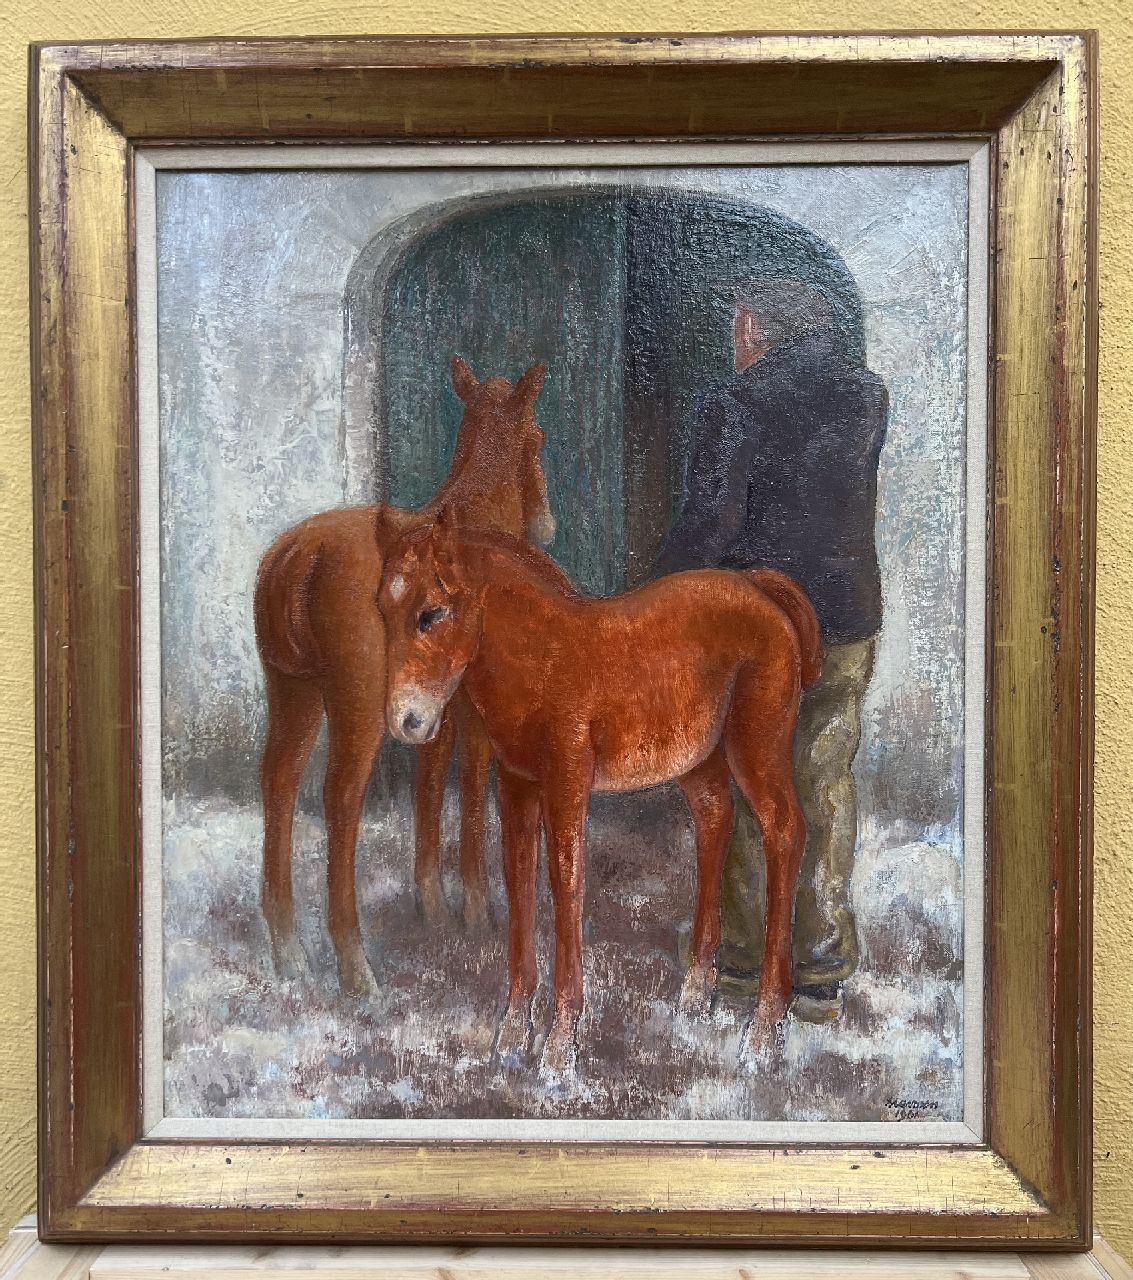 Meurs H.H.  | 'Harmen' Hermanus Meurs, Foals, oil on canvas 64.8 x 54.4 cm, signed l.r. and on the stretcher and dated 1961